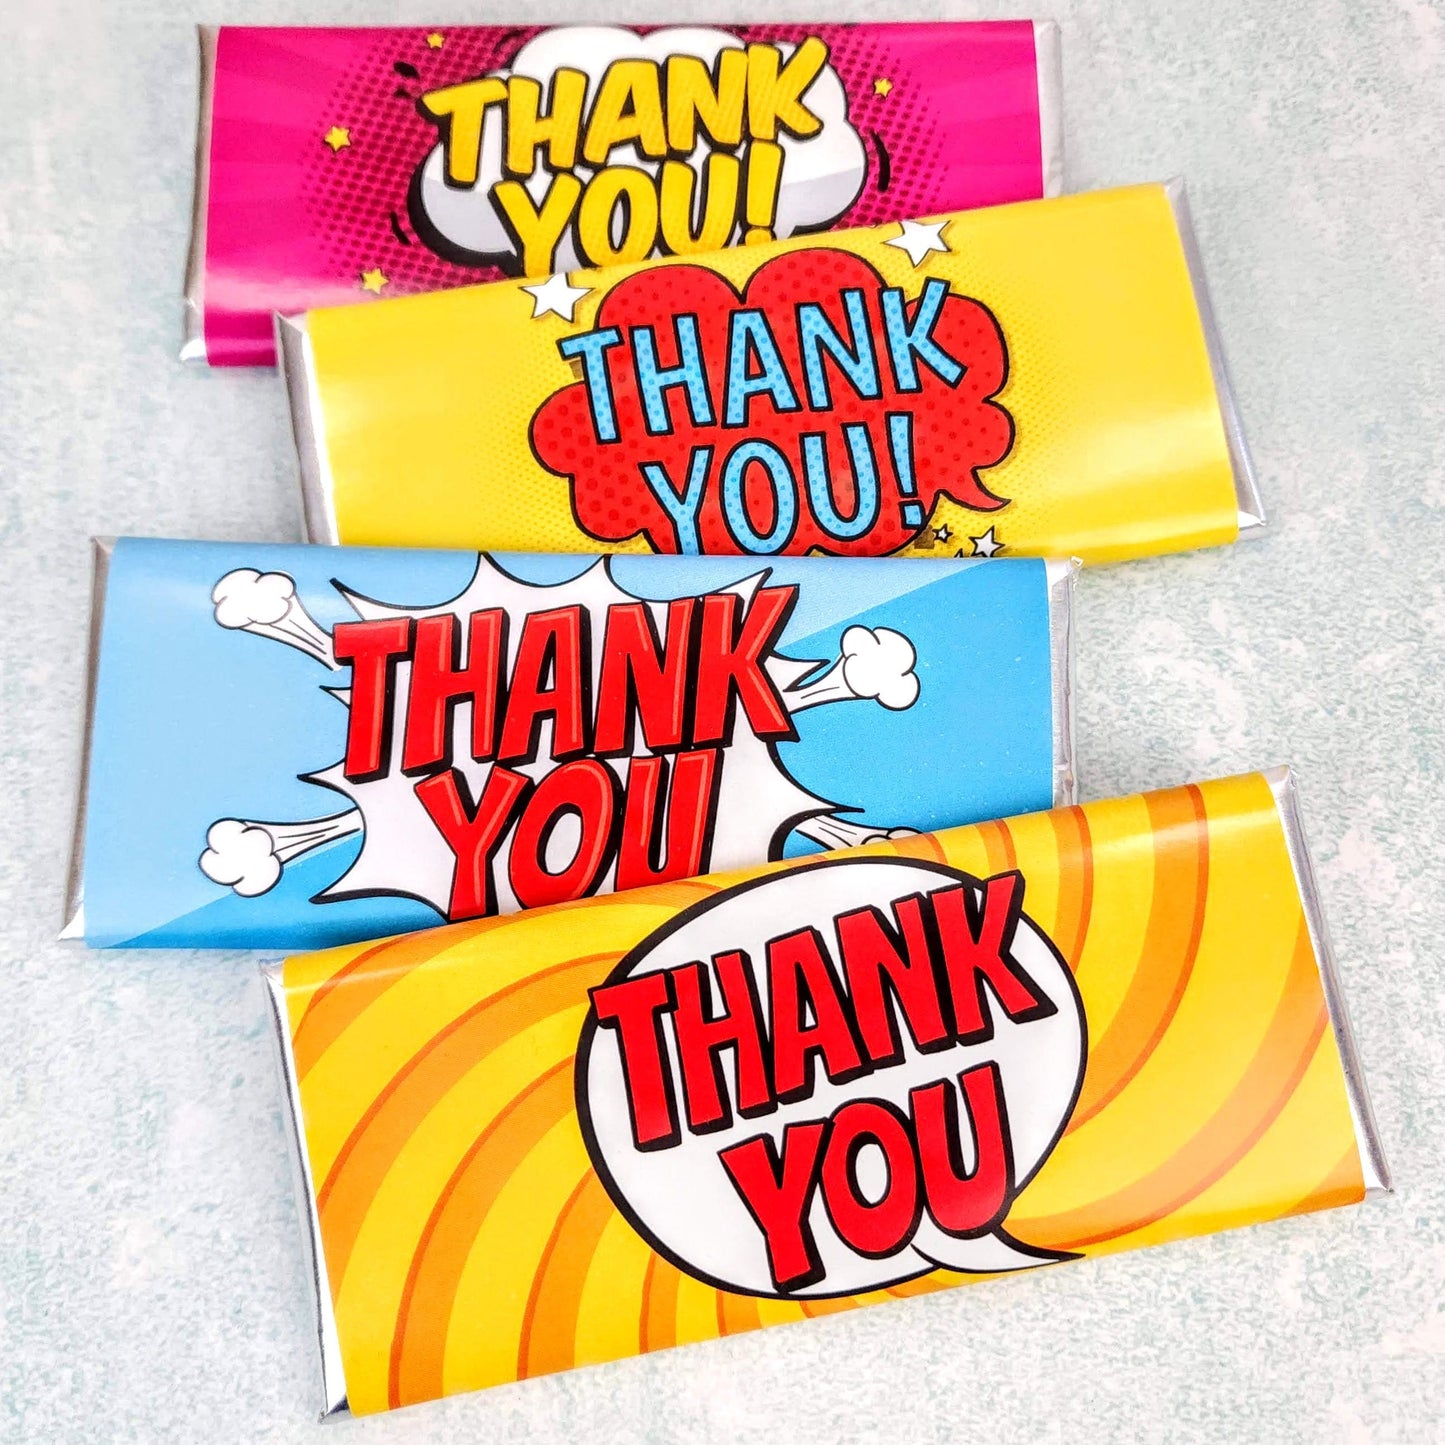 TY214 - Thank You Yellow Swirl Comic Candy Bar Wrapper Thank You Yellow Swirl Comic Candy Bar Wrapper Candy Wrappers TY214